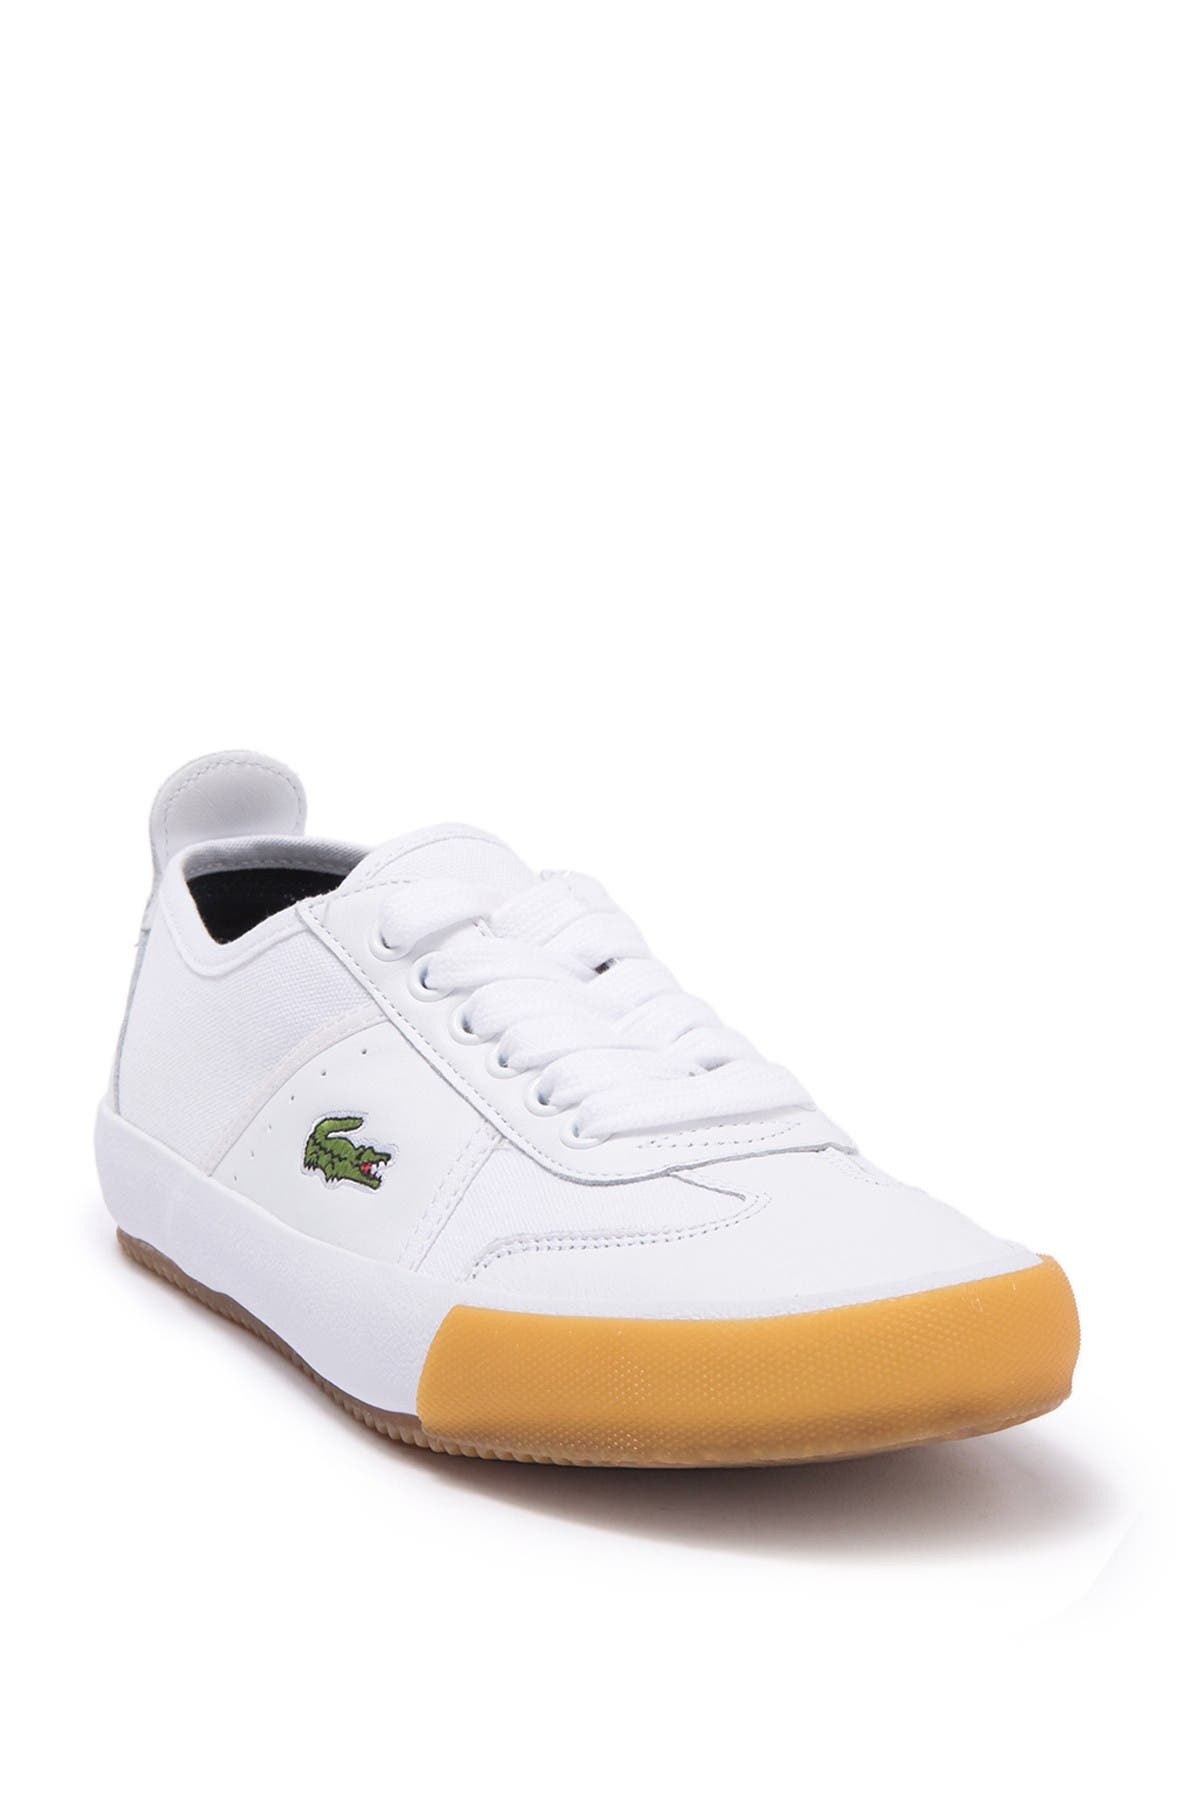 lacoste shoes nordstrom rack